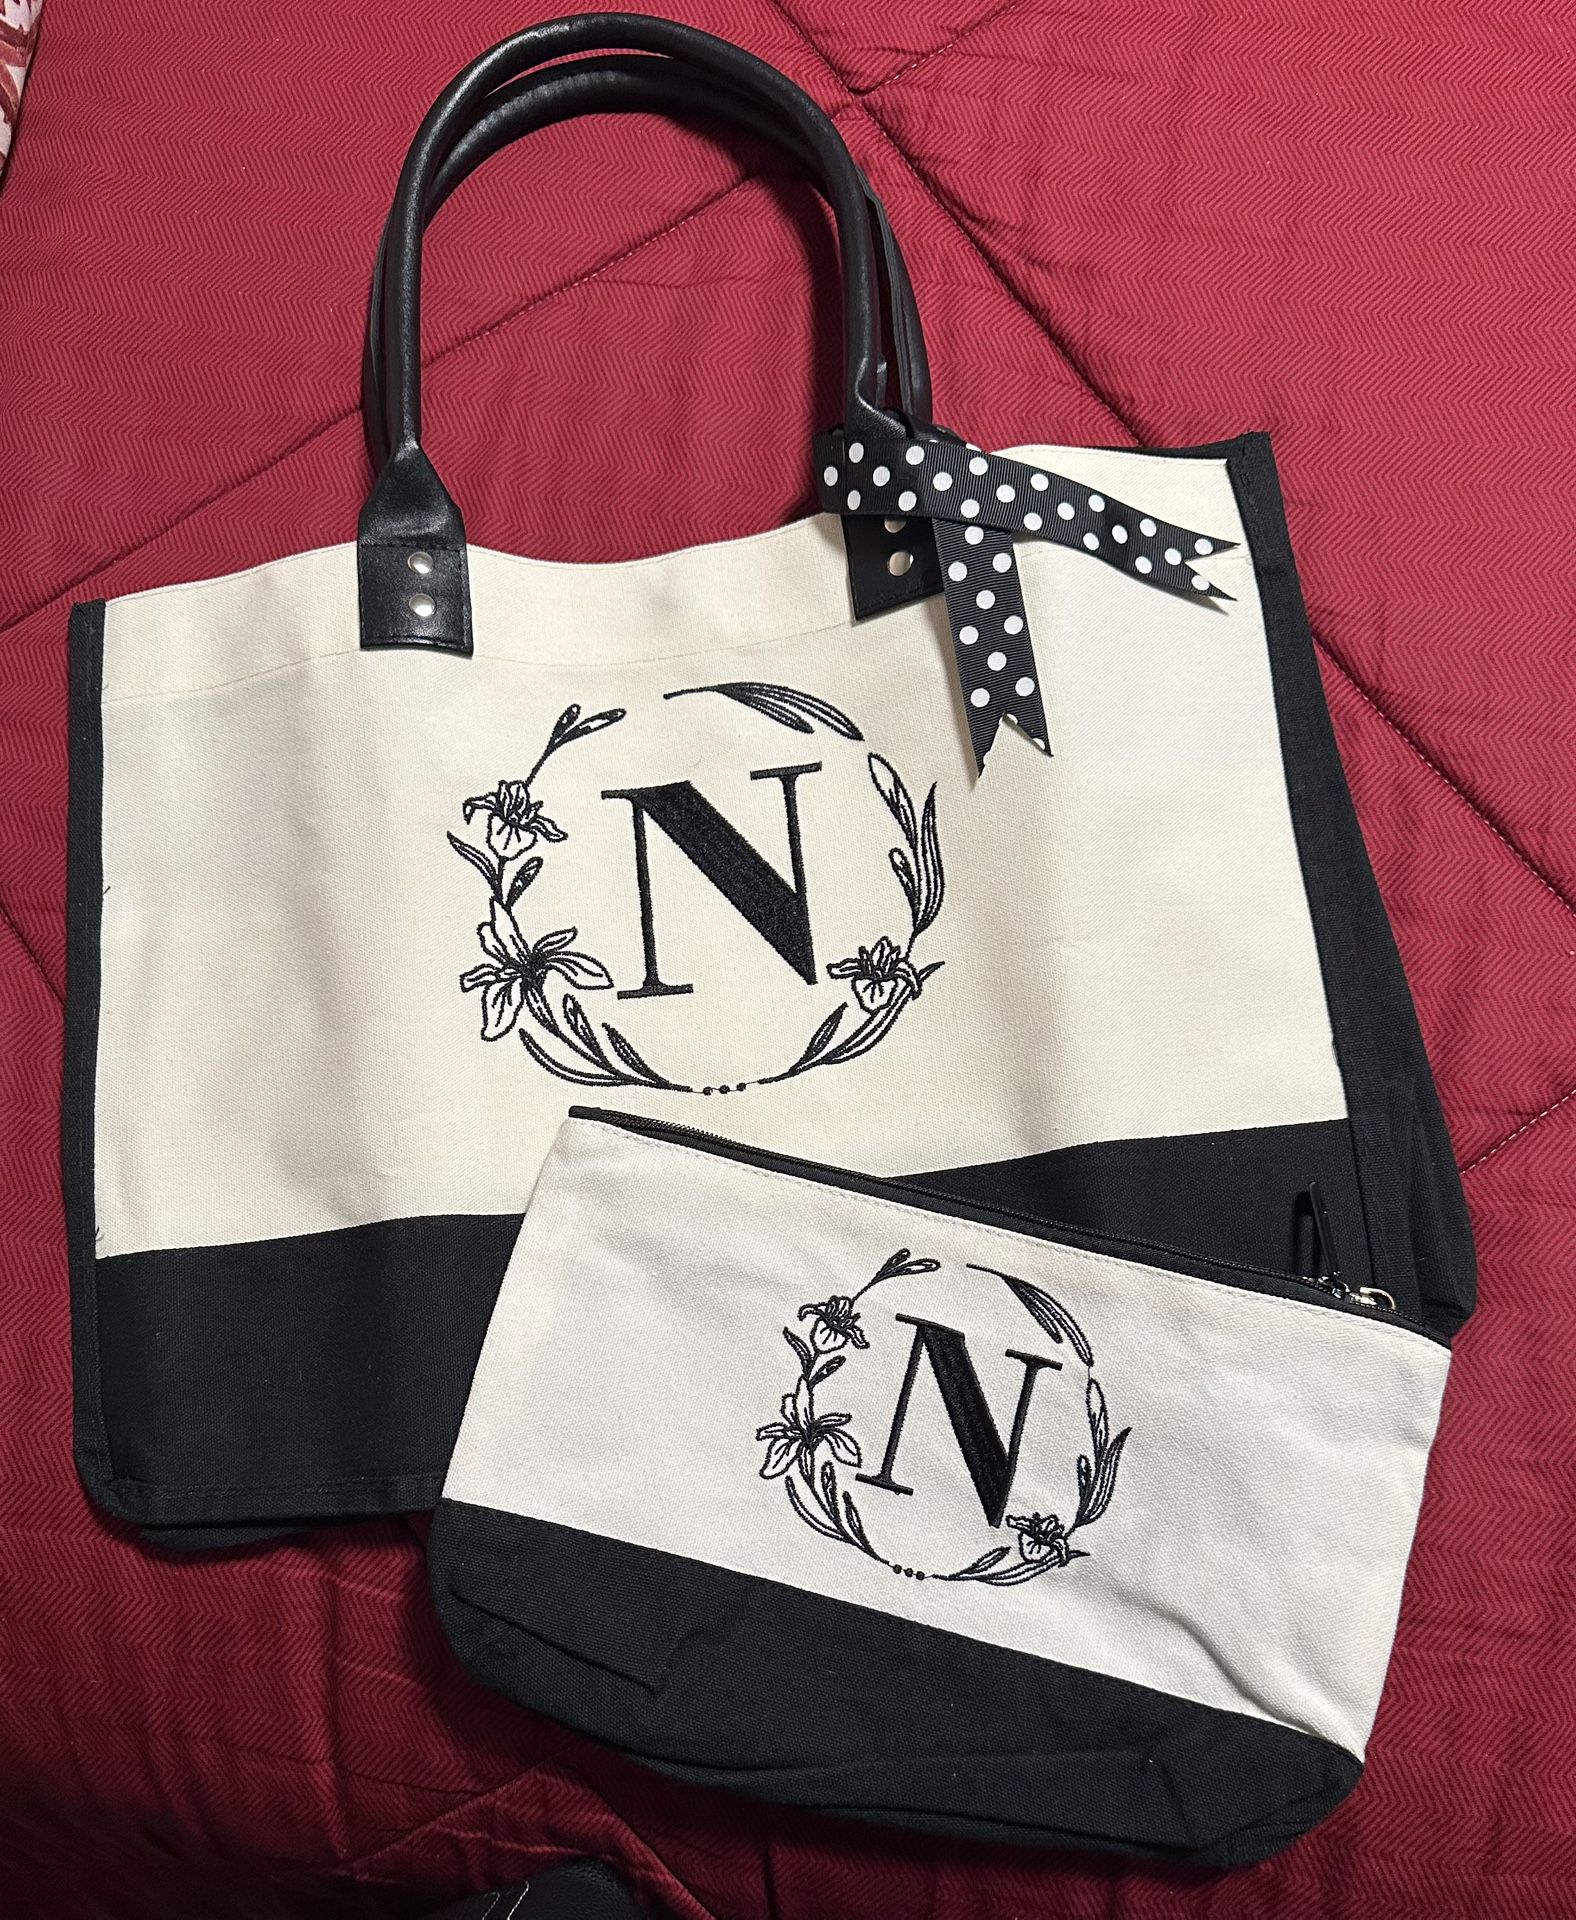  BRAND NEW BeeGreen “N” Tote and Makeup Bag